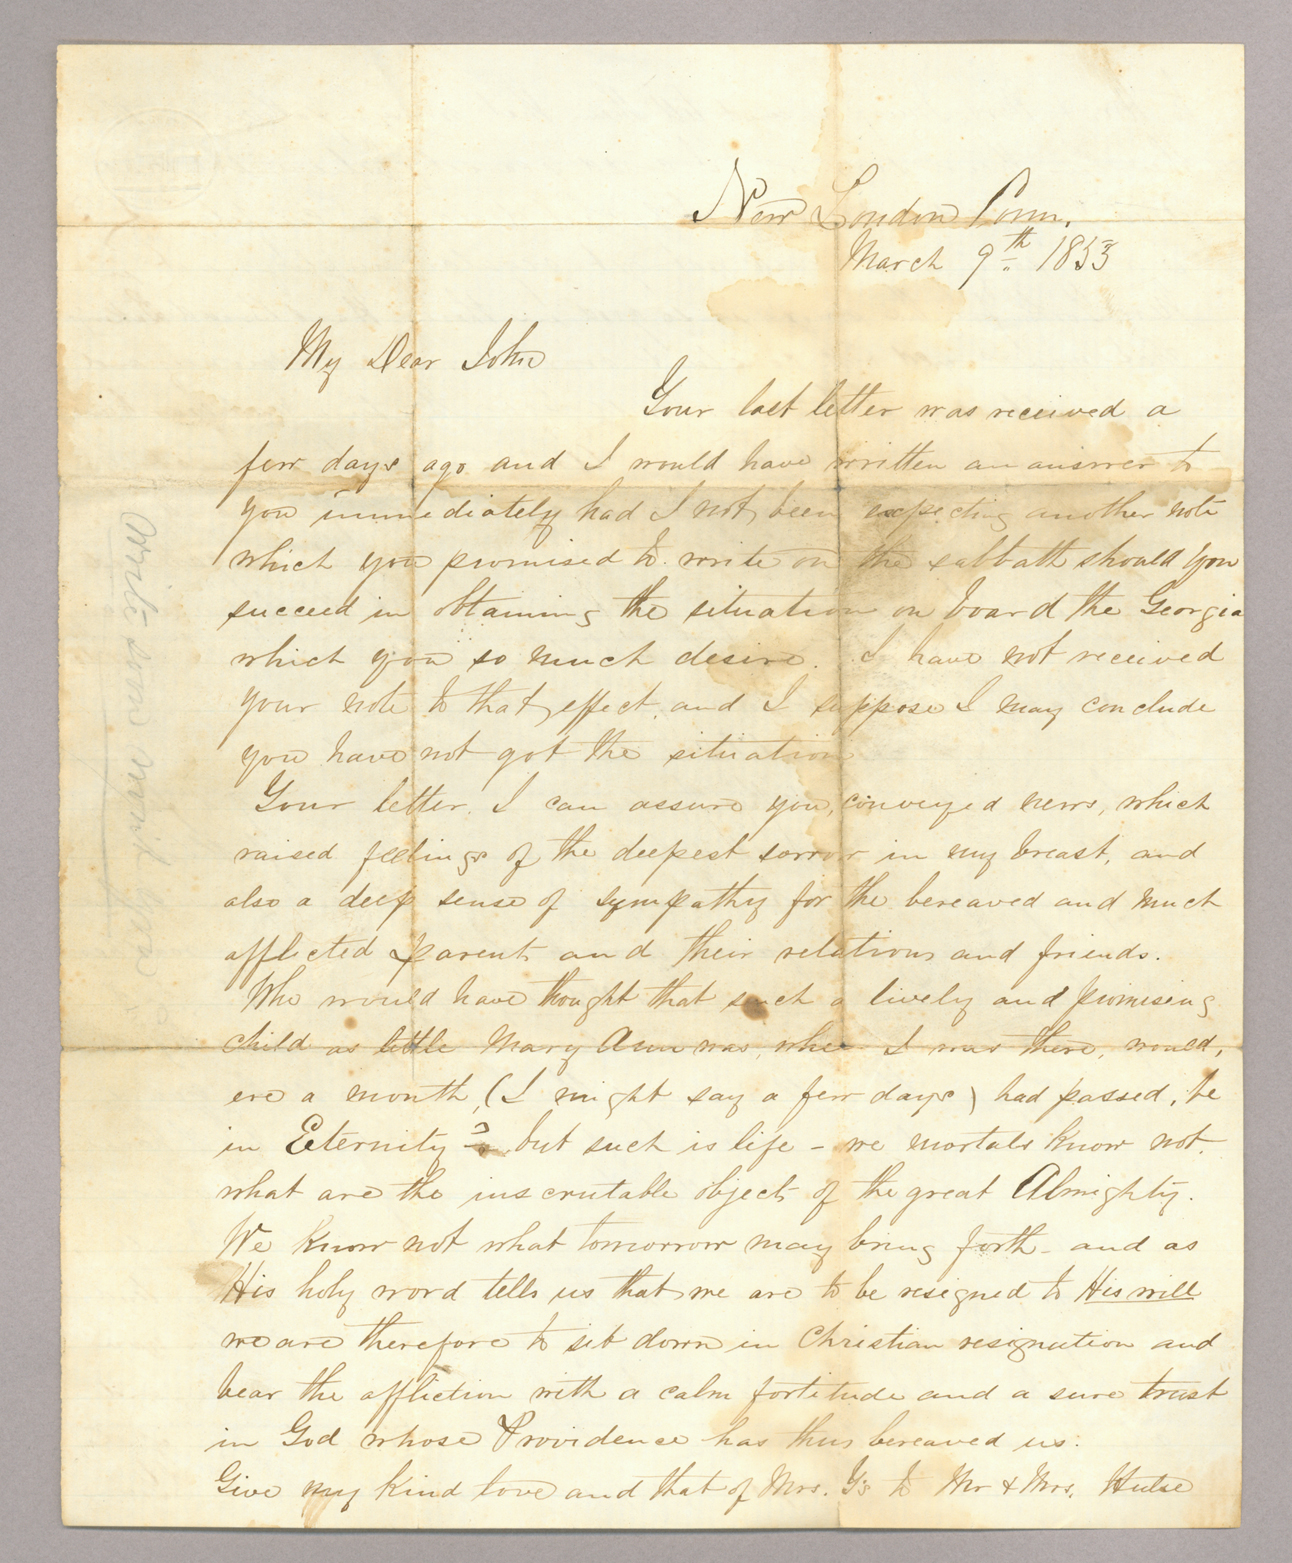 Letter. T[homas] L[owry] Young, New London, Connecticut, to "My Dear John" [John E. Brownlee], n. p., Page 1